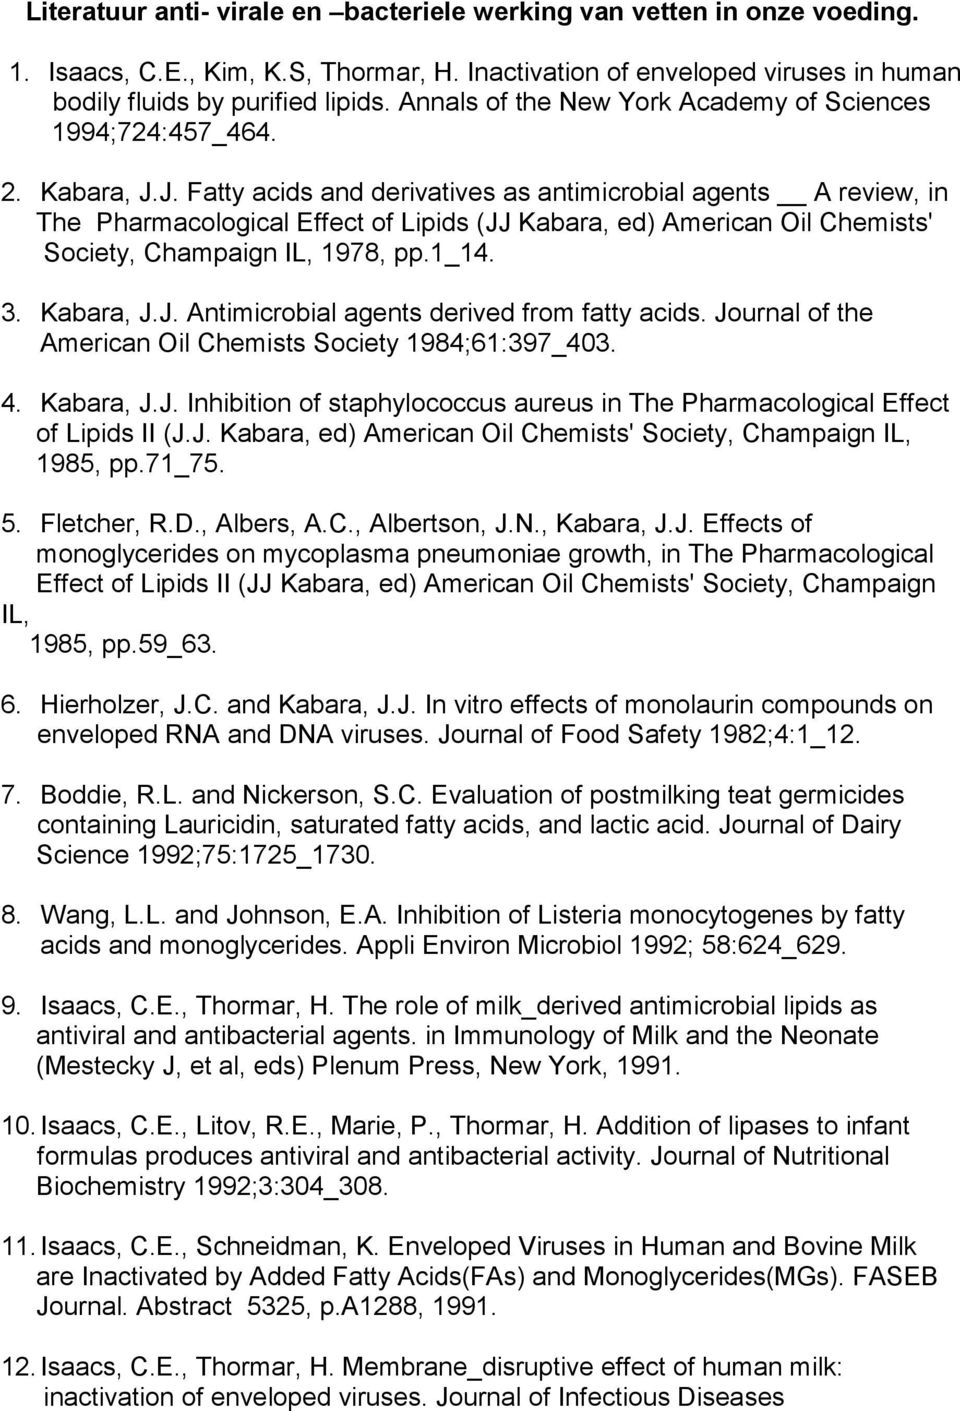 J. Fatty acids and derivatives as antimicrobial agents A review, in The Pharmacological Effect of Lipids (JJ Kabara, ed) American Oil Chemists' Society, Champaign IL, 1978, pp.1_14. 3. Kabara, J.J. Antimicrobial agents derived from fatty acids.